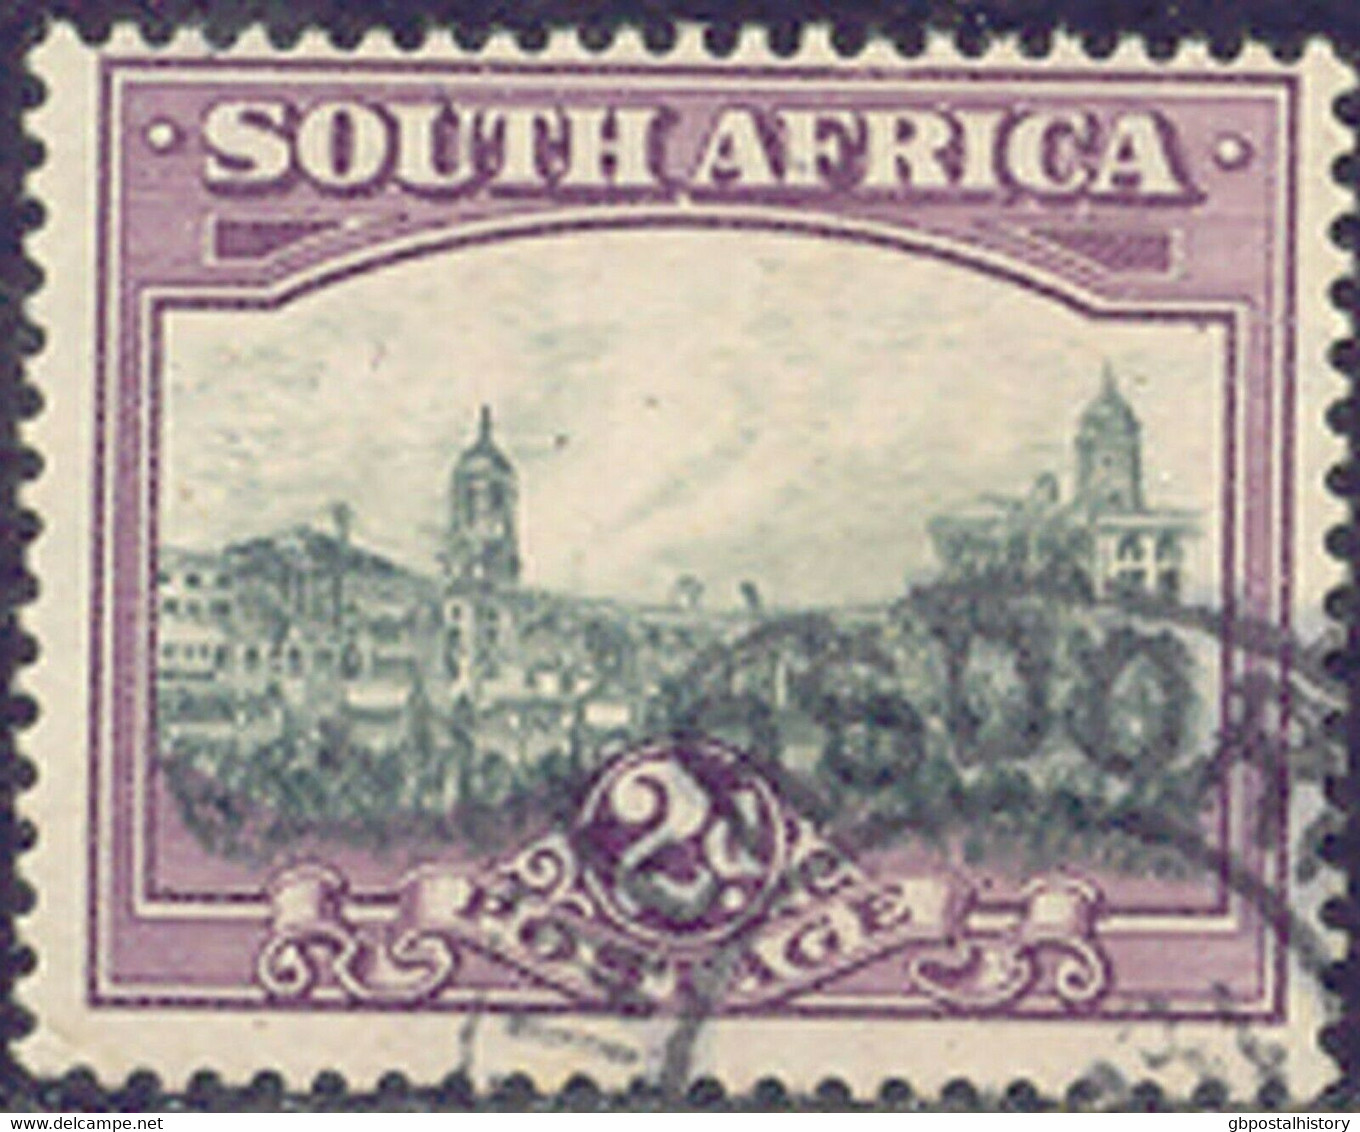 SOUTH AFRICA 1930 2 D. Government Building South Africa, MAJOR ERROR & VARIETY - Used Stamps